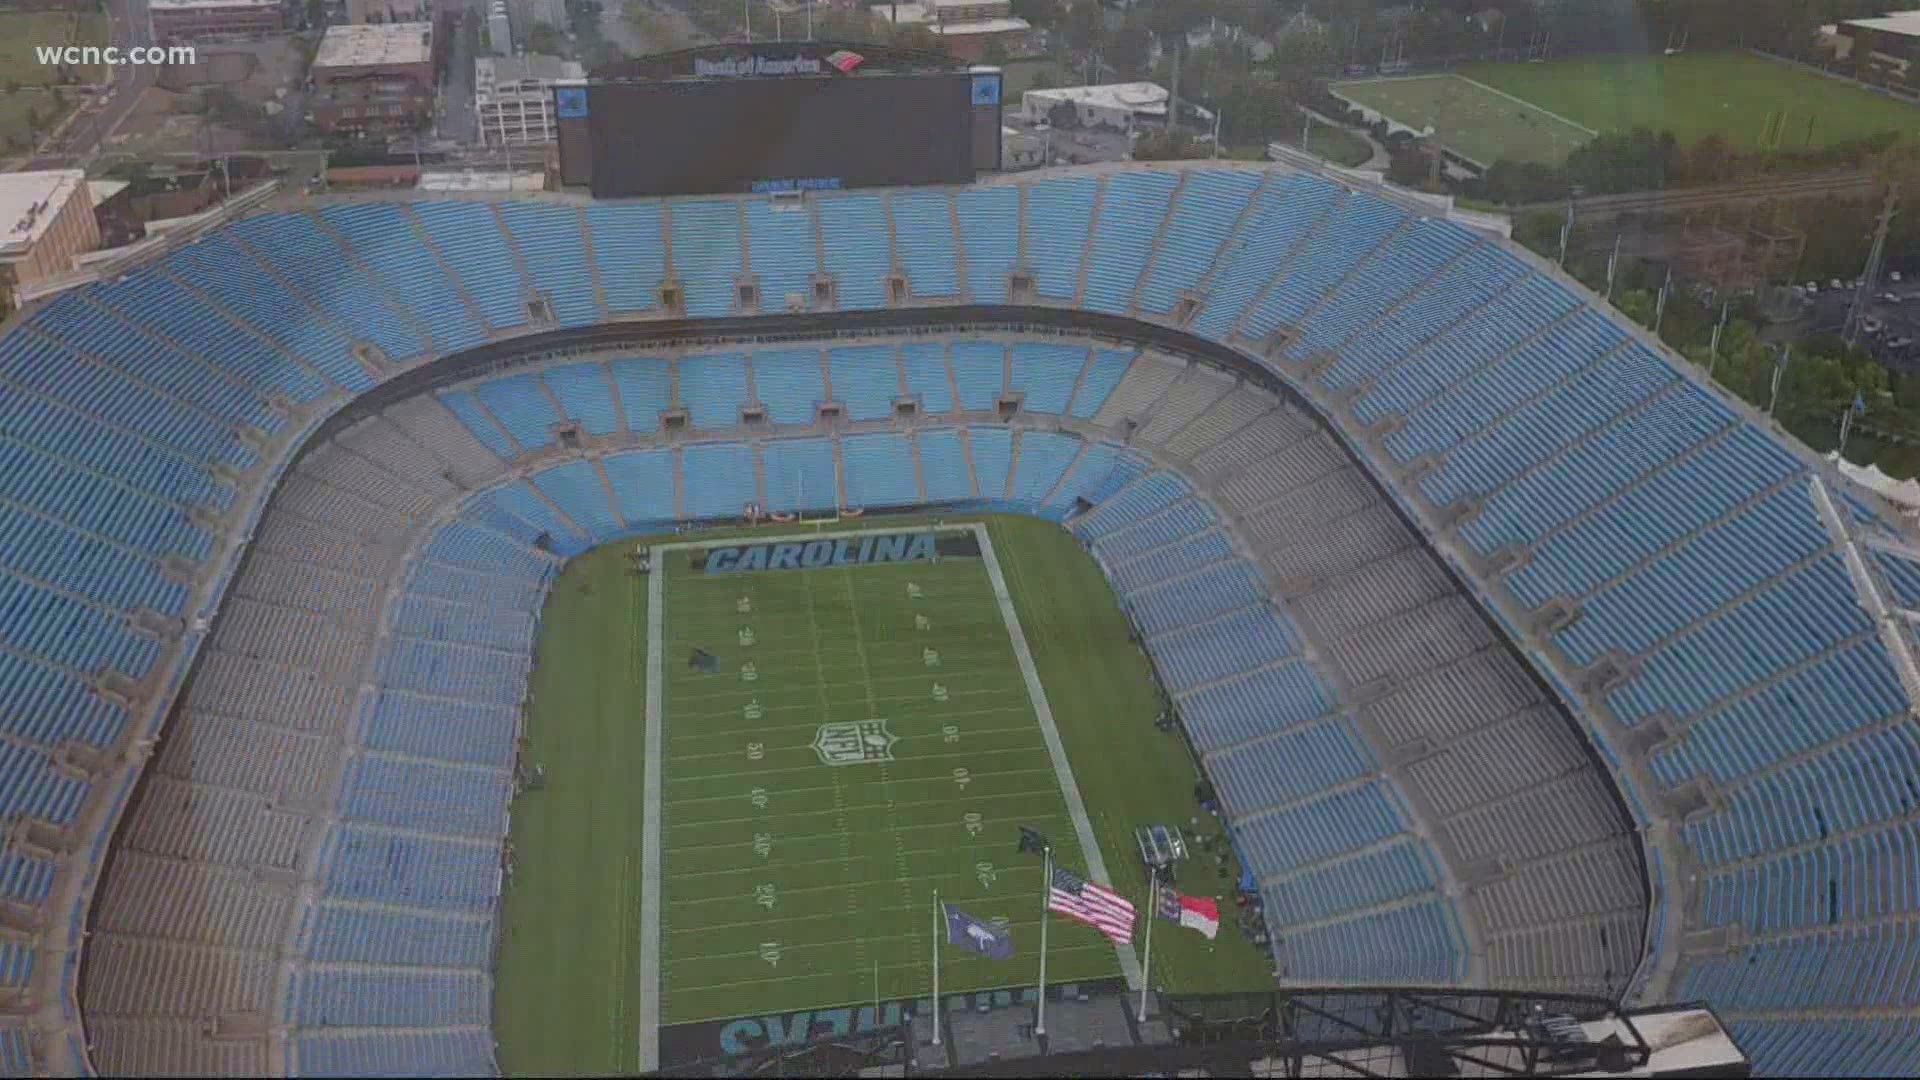 Today a new title sponsor was announced for a yearly bowl game held in Charlotte.